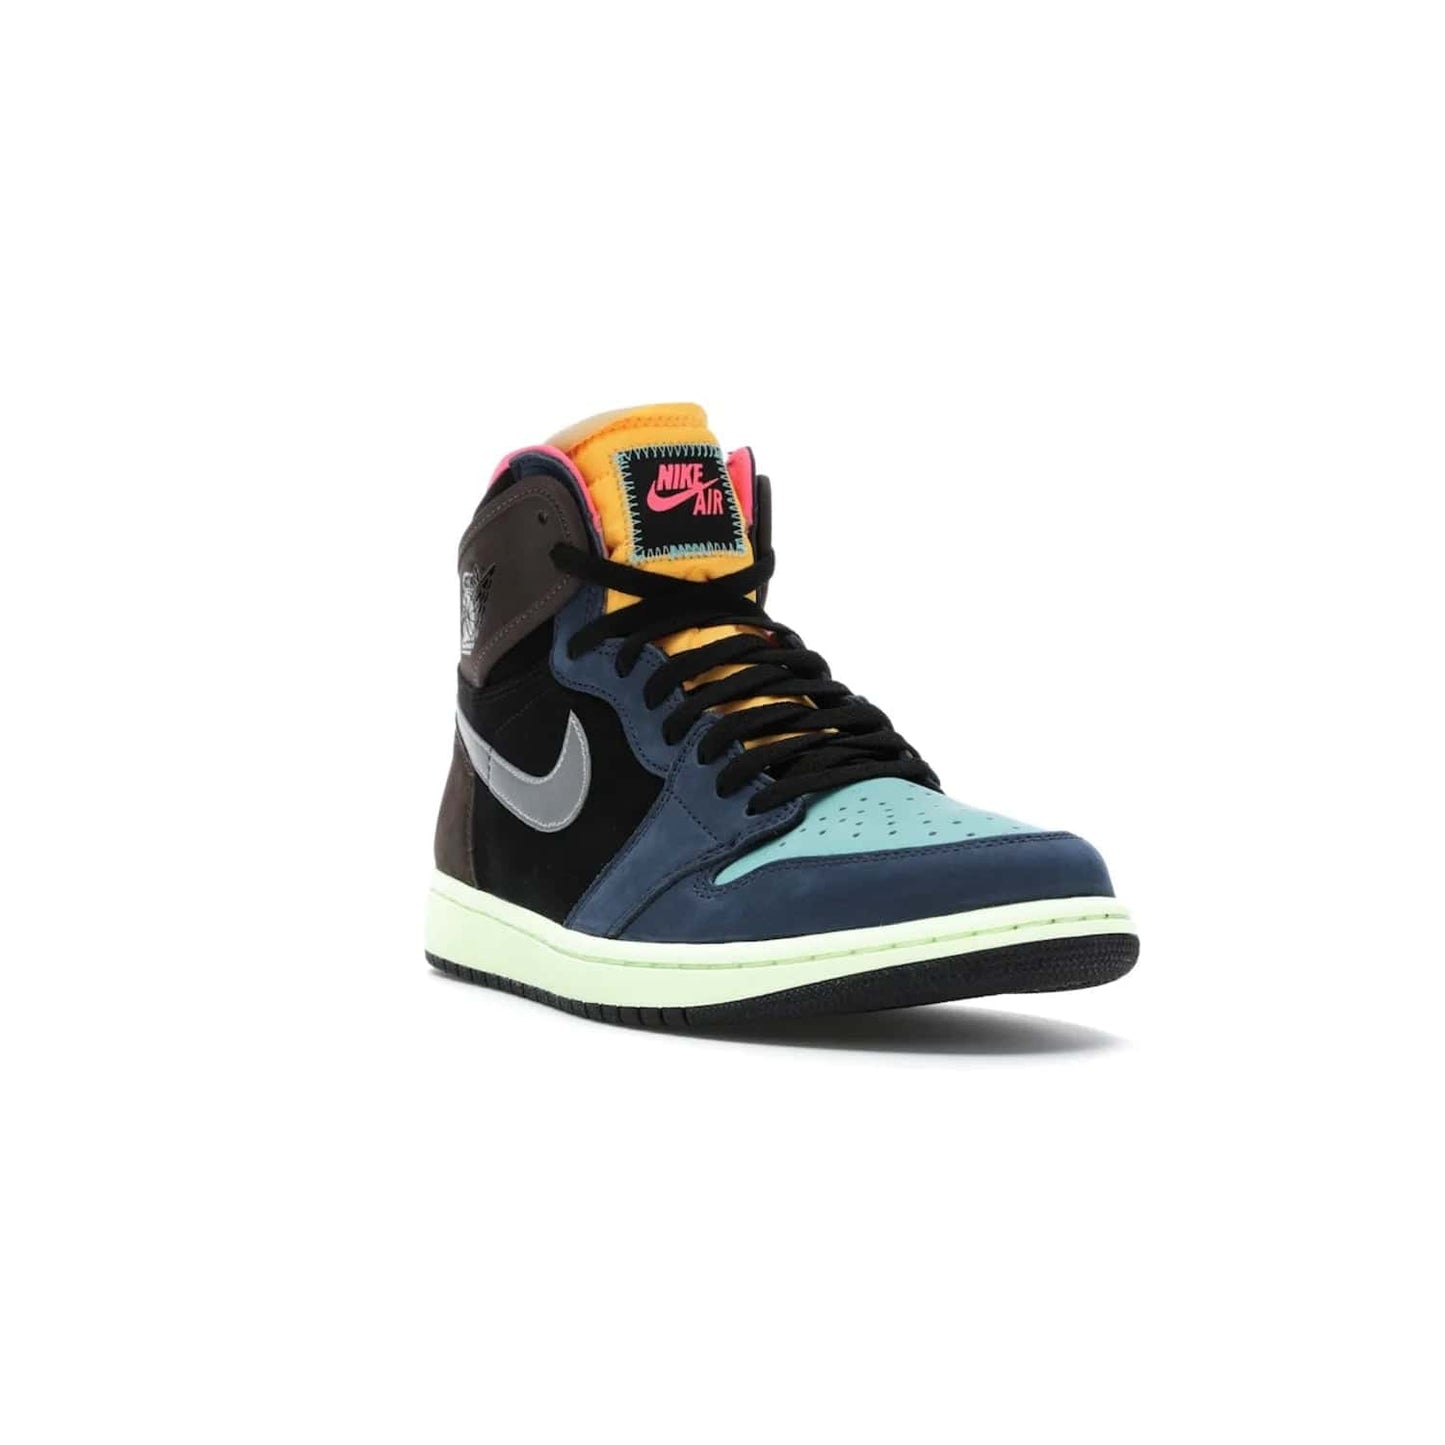 Jordan 1 Retro High Tokyo Bio Hack - Image 7 - Only at www.BallersClubKickz.com - Step up your sneaker game with the Air Jordan 1 Retro High Tokyo Bio Hack! Unique design featuring multiple materials and eye-catching colors. Metallic leather Swoosh and light green midsole for a stunning look. Available now for just $170.